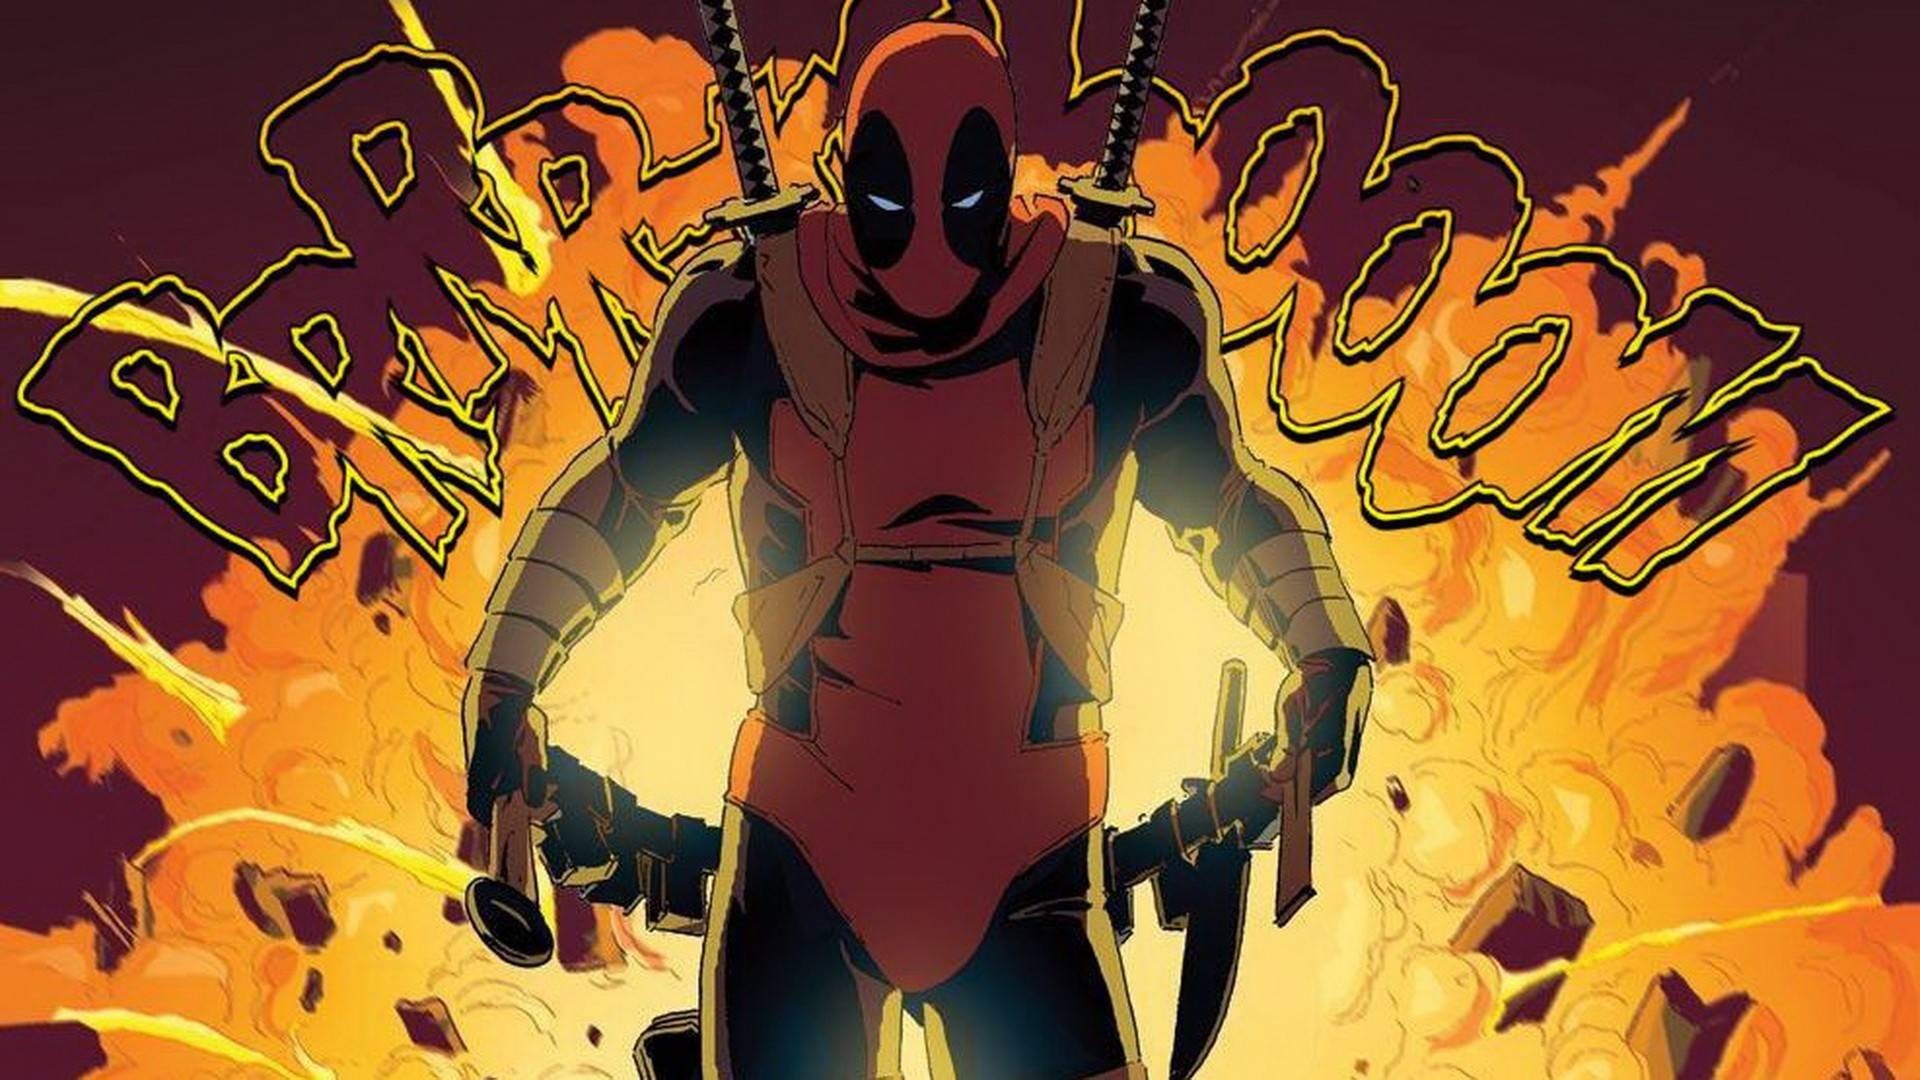 1920x1080 1920 x 1080 px Desktop Backgrounds - deadpool comic picture by Lowell Smith  for - TrunkWeed